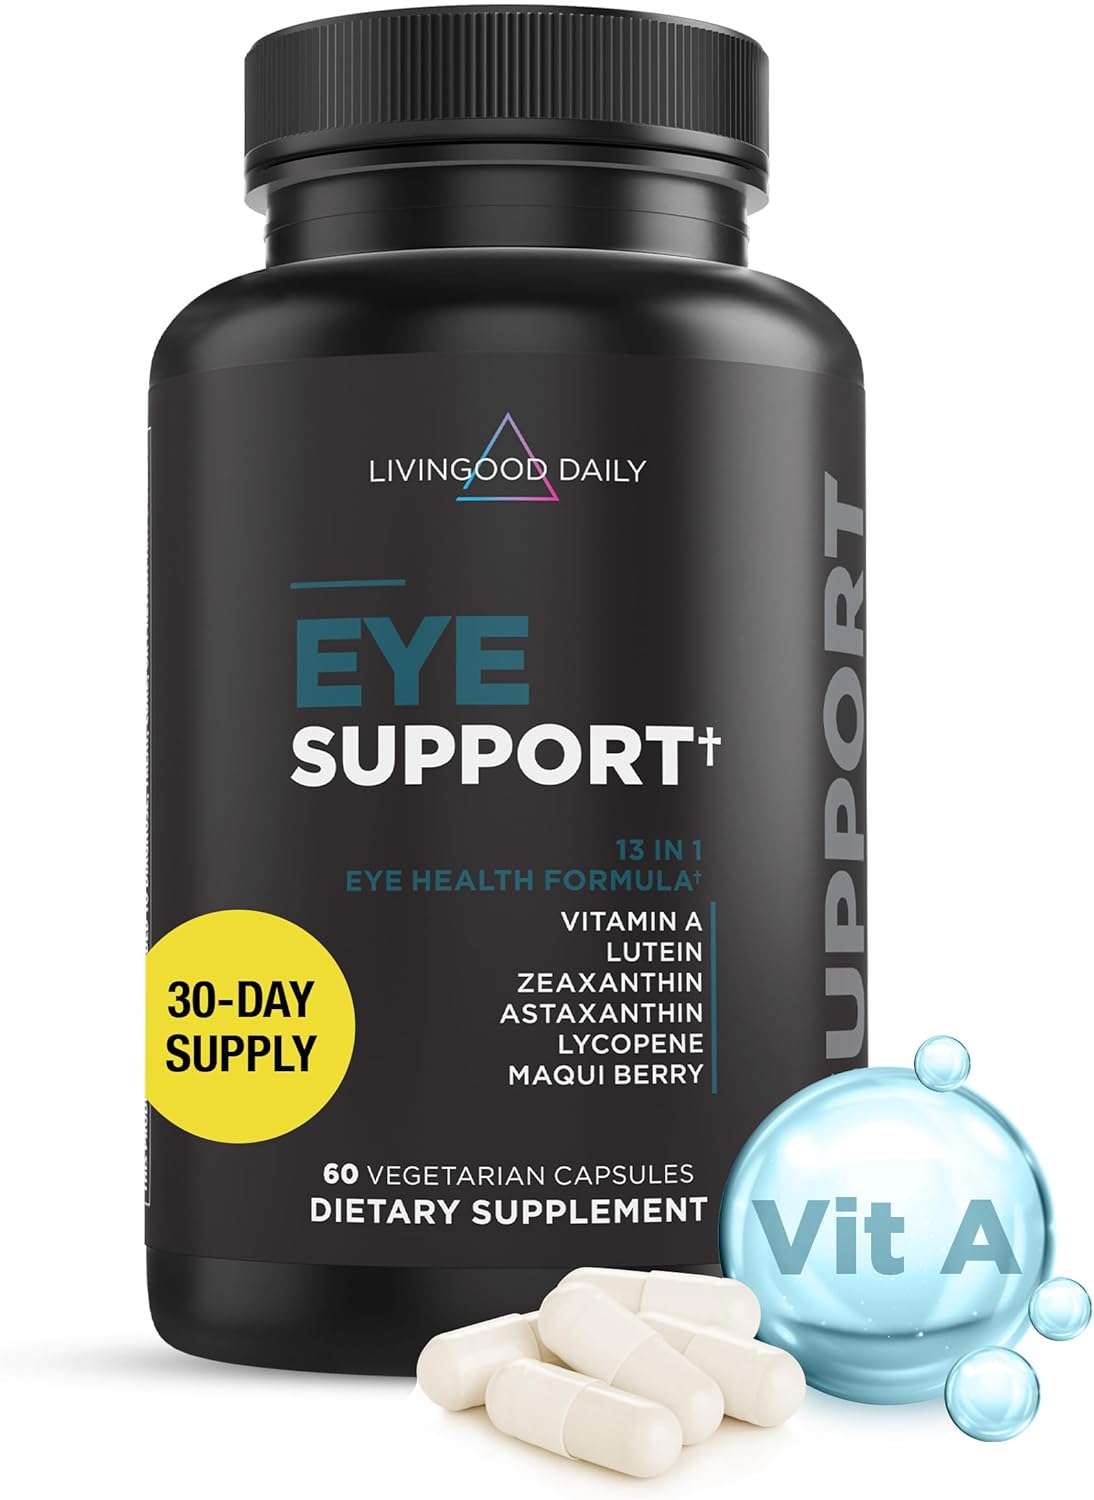 Livingood Daily Lutein & Zeaxanthin Supplements, Eye Support (60 Vegetarian Capsules) - Eye Vitamins with Astaxanthin, Vitamin A, Maqui Berry & Lycopene Support Eye Health - Eye Supplements for Adults